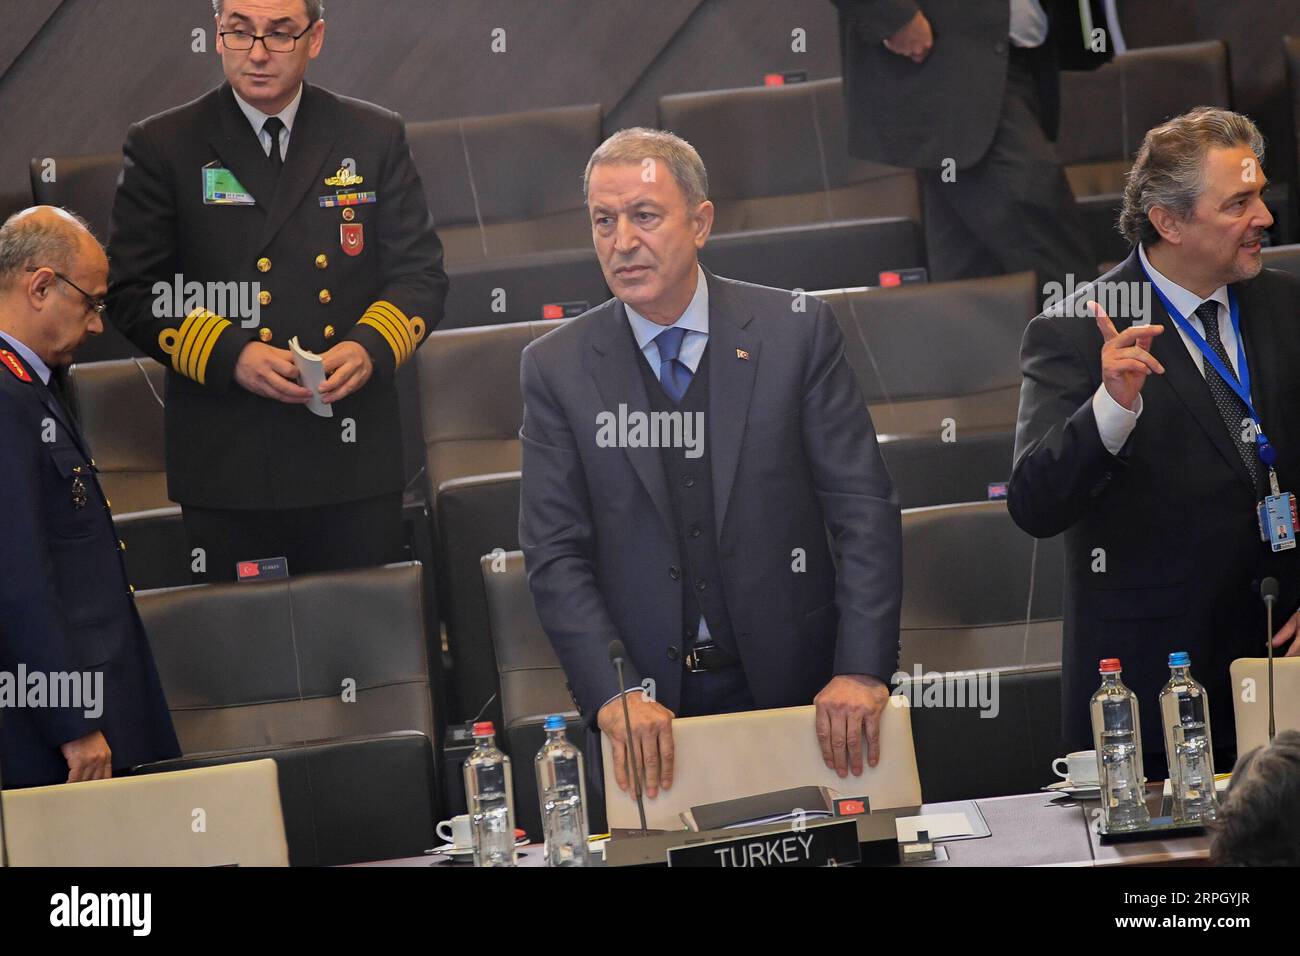 191024 -- BRUSSELS, Oct. 24, 2019 -- Turkish Defense Minister Hulusi Akar C attends the Meeting of the North Atlantic Council in Defense Ministers session at the NATO headquarters in Brussels, Belgium, on Oct. 24, 2019. Photo by /Xinhua BELGIUM-BRUSSELS-NATO-DM-MEETING RICCARDOxPAREGGIANI PUBLICATIONxNOTxINxCHN Stock Photo